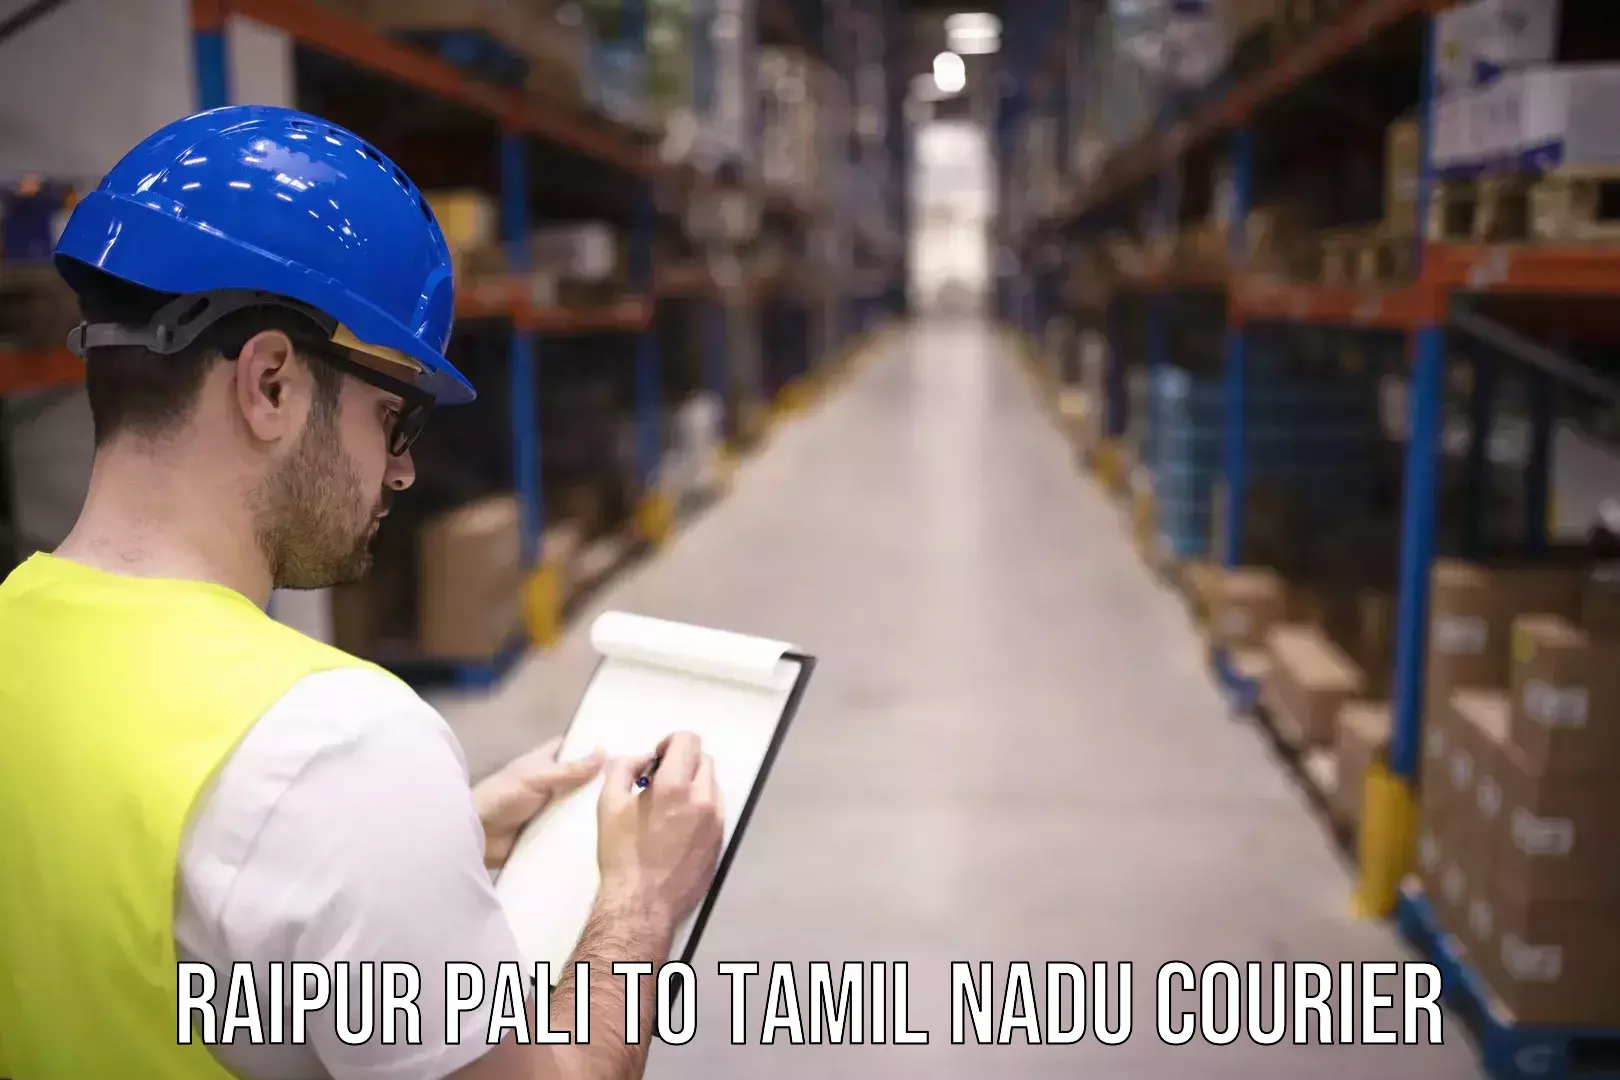 Global courier networks Raipur Pali to Tuticorin Port